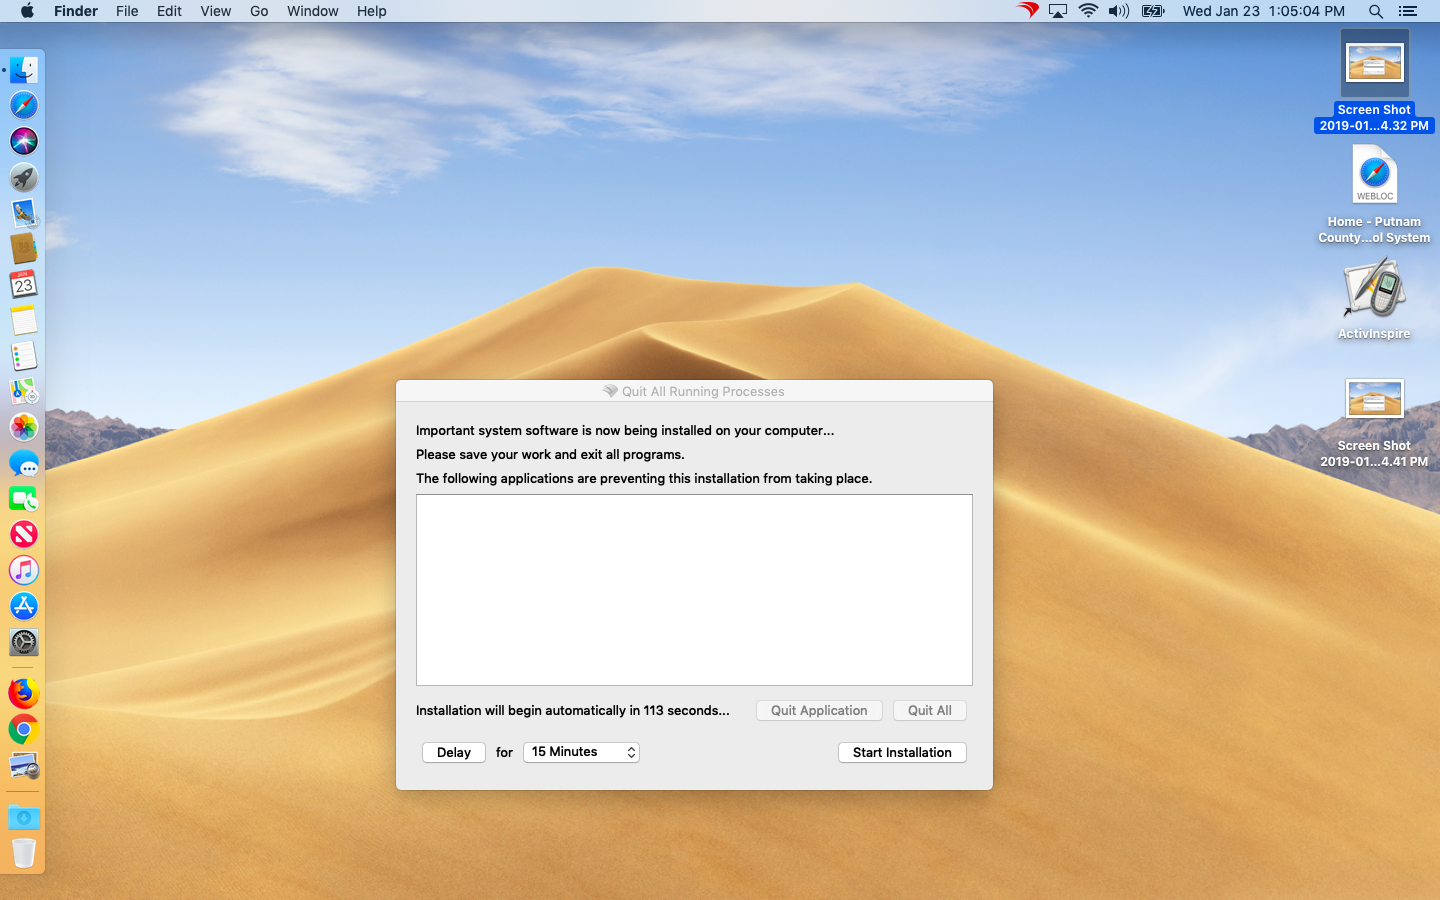 The Quit All Running Processes dialog box. In this case, there are no active applications open.